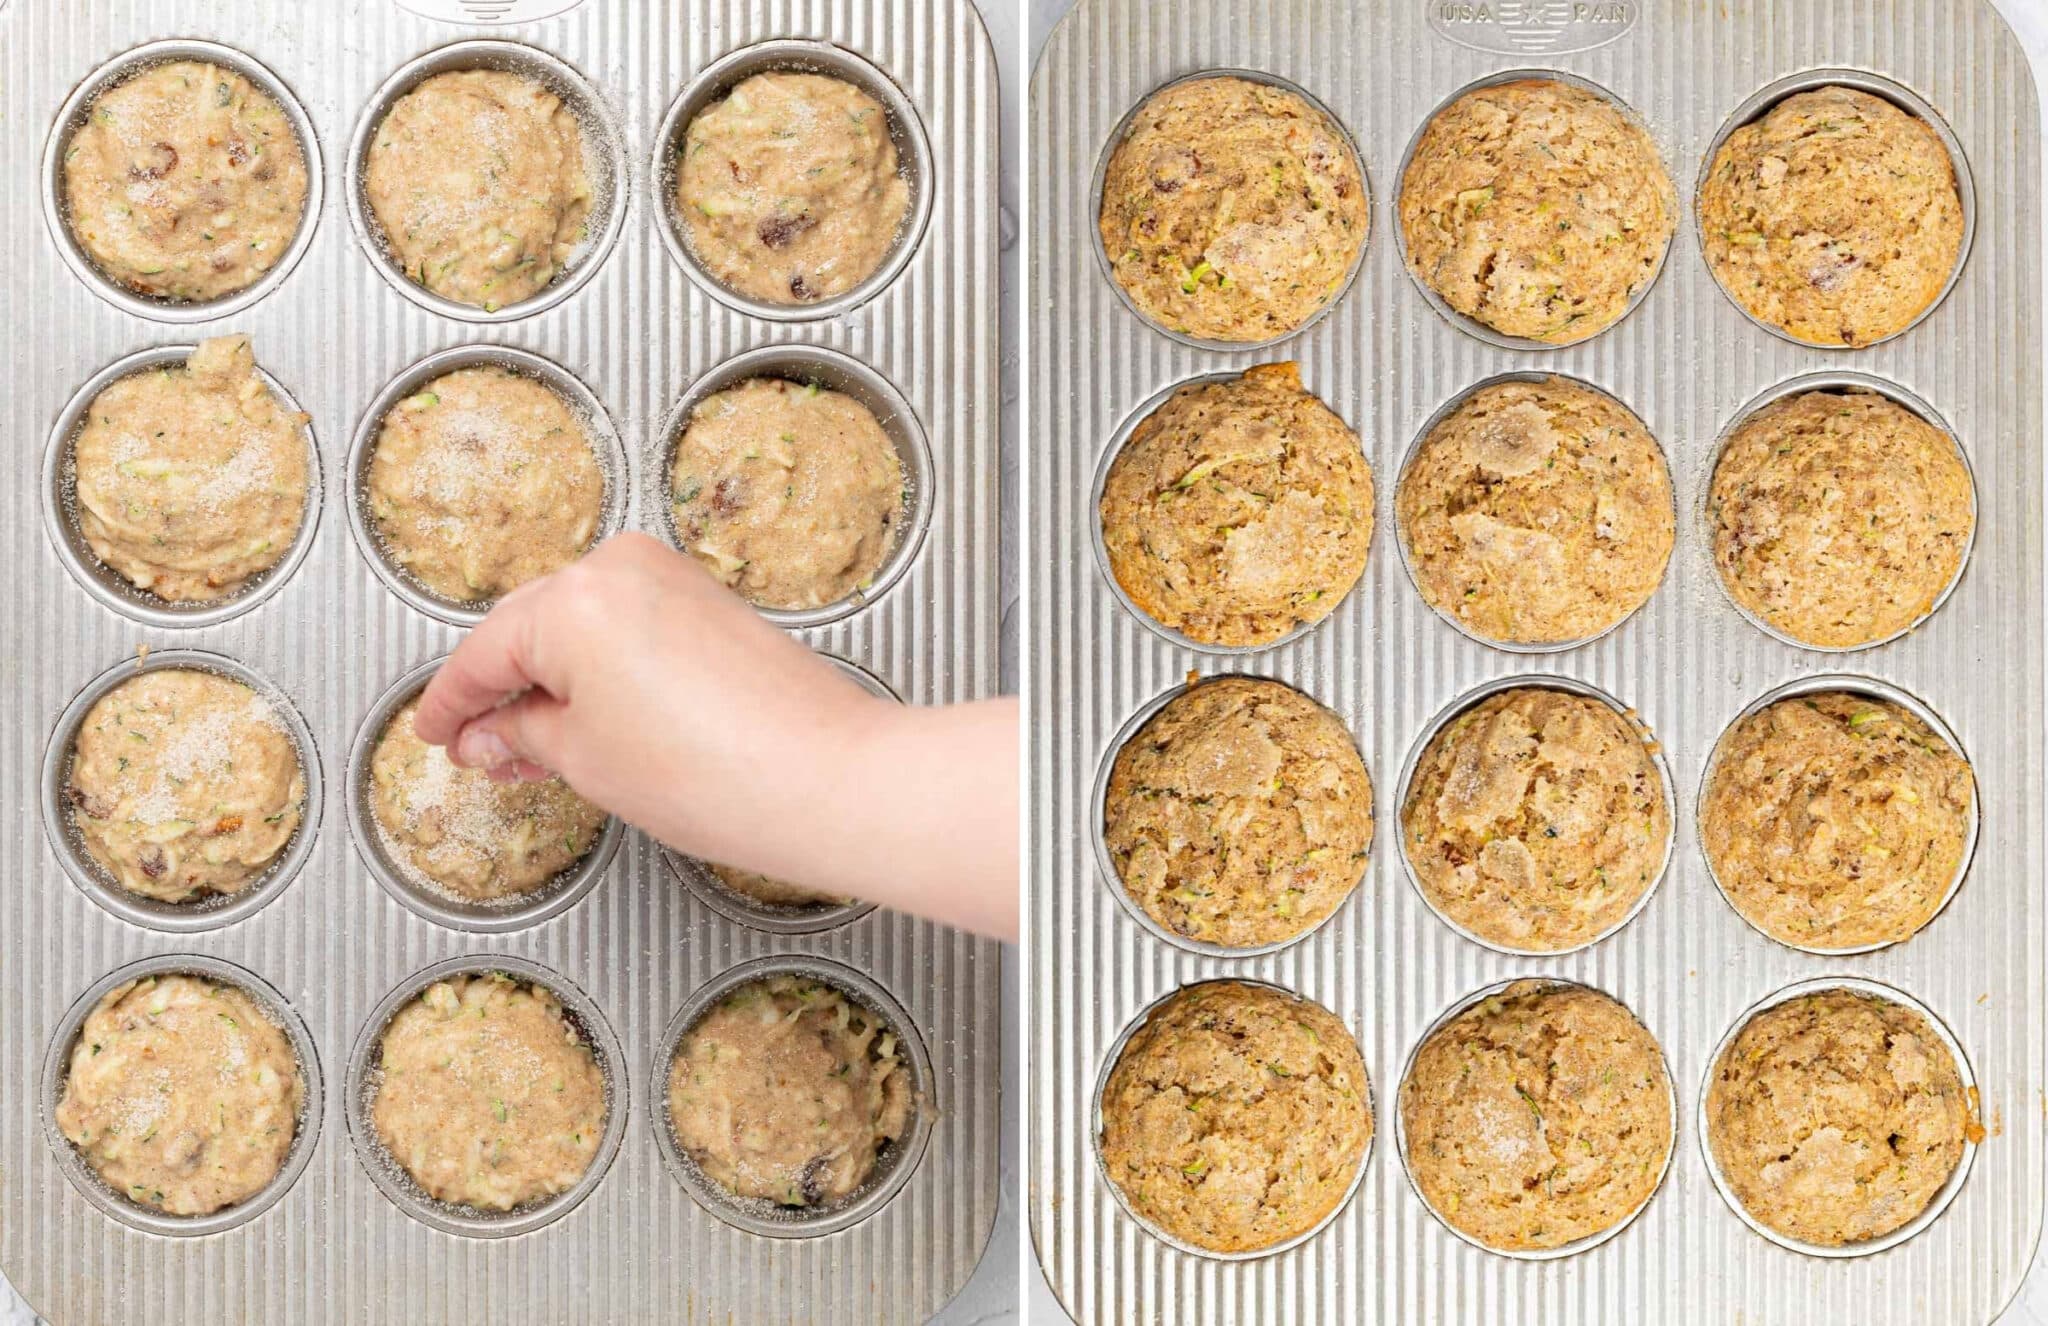 muffins before and after cooking